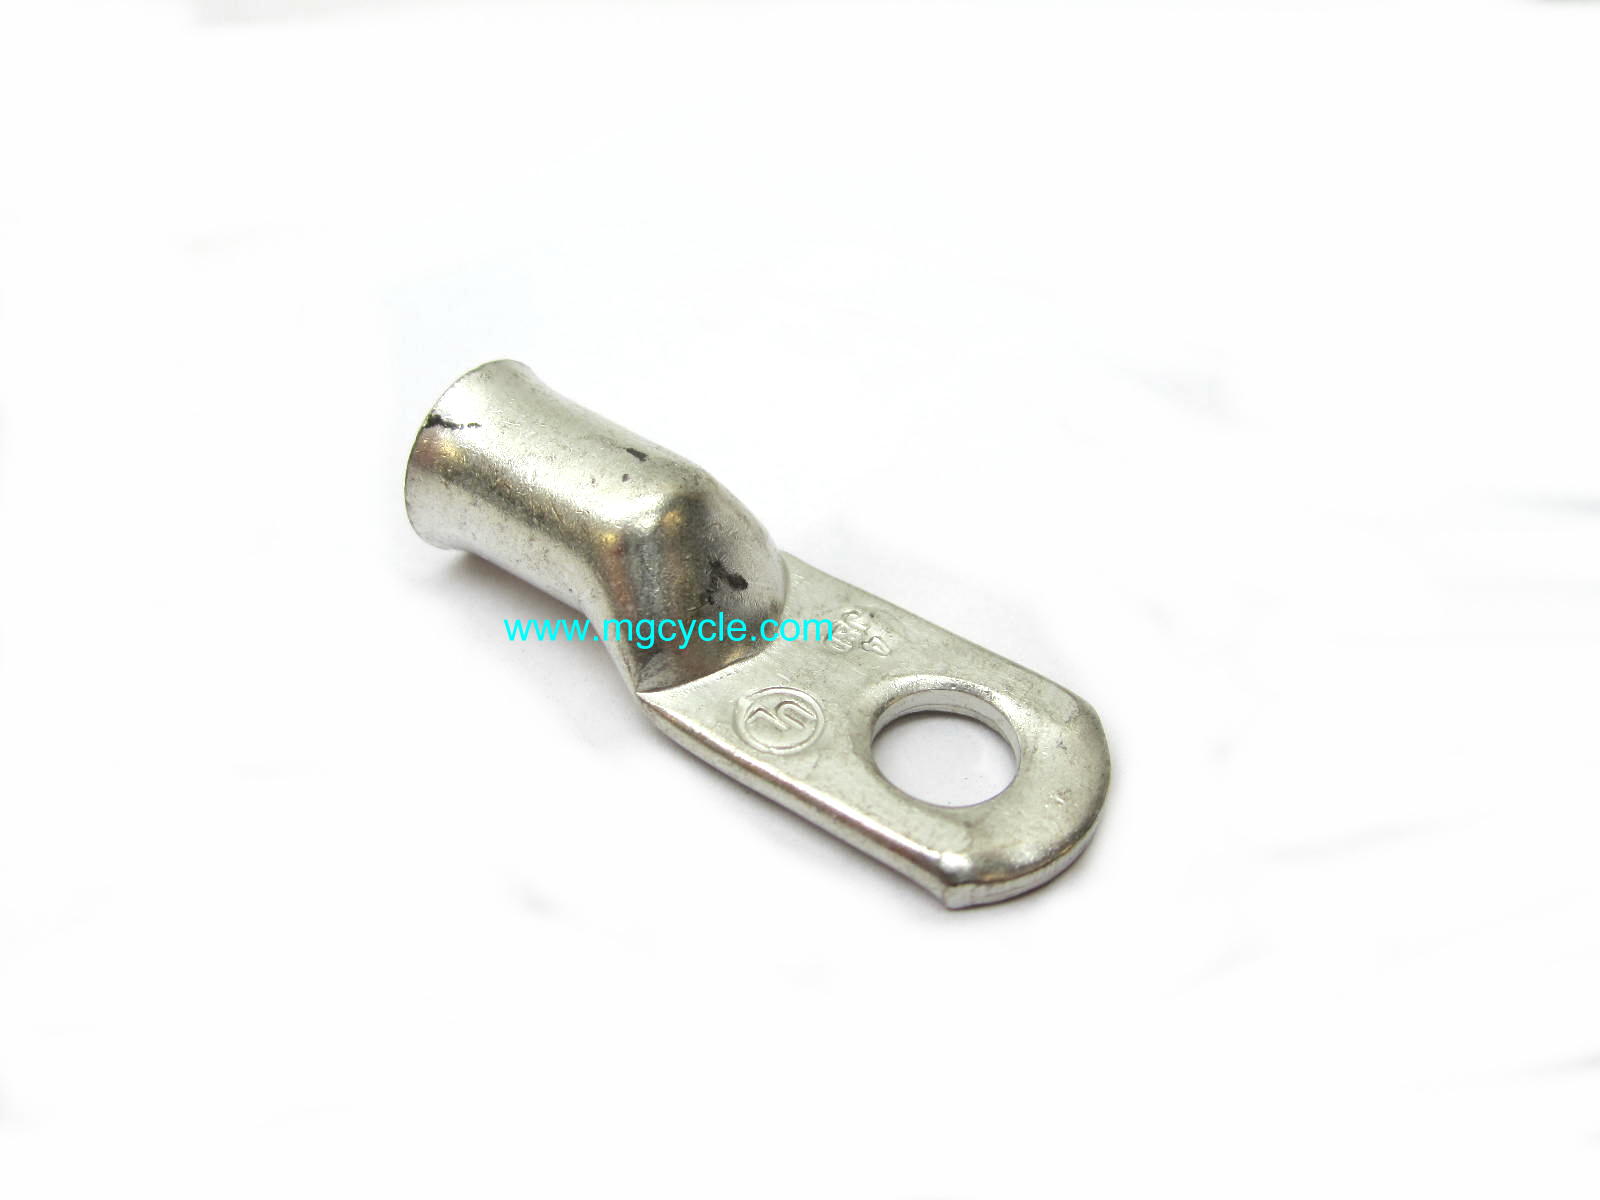 6mm battery cable lug, copper terminal, 4 gauge - Click Image to Close